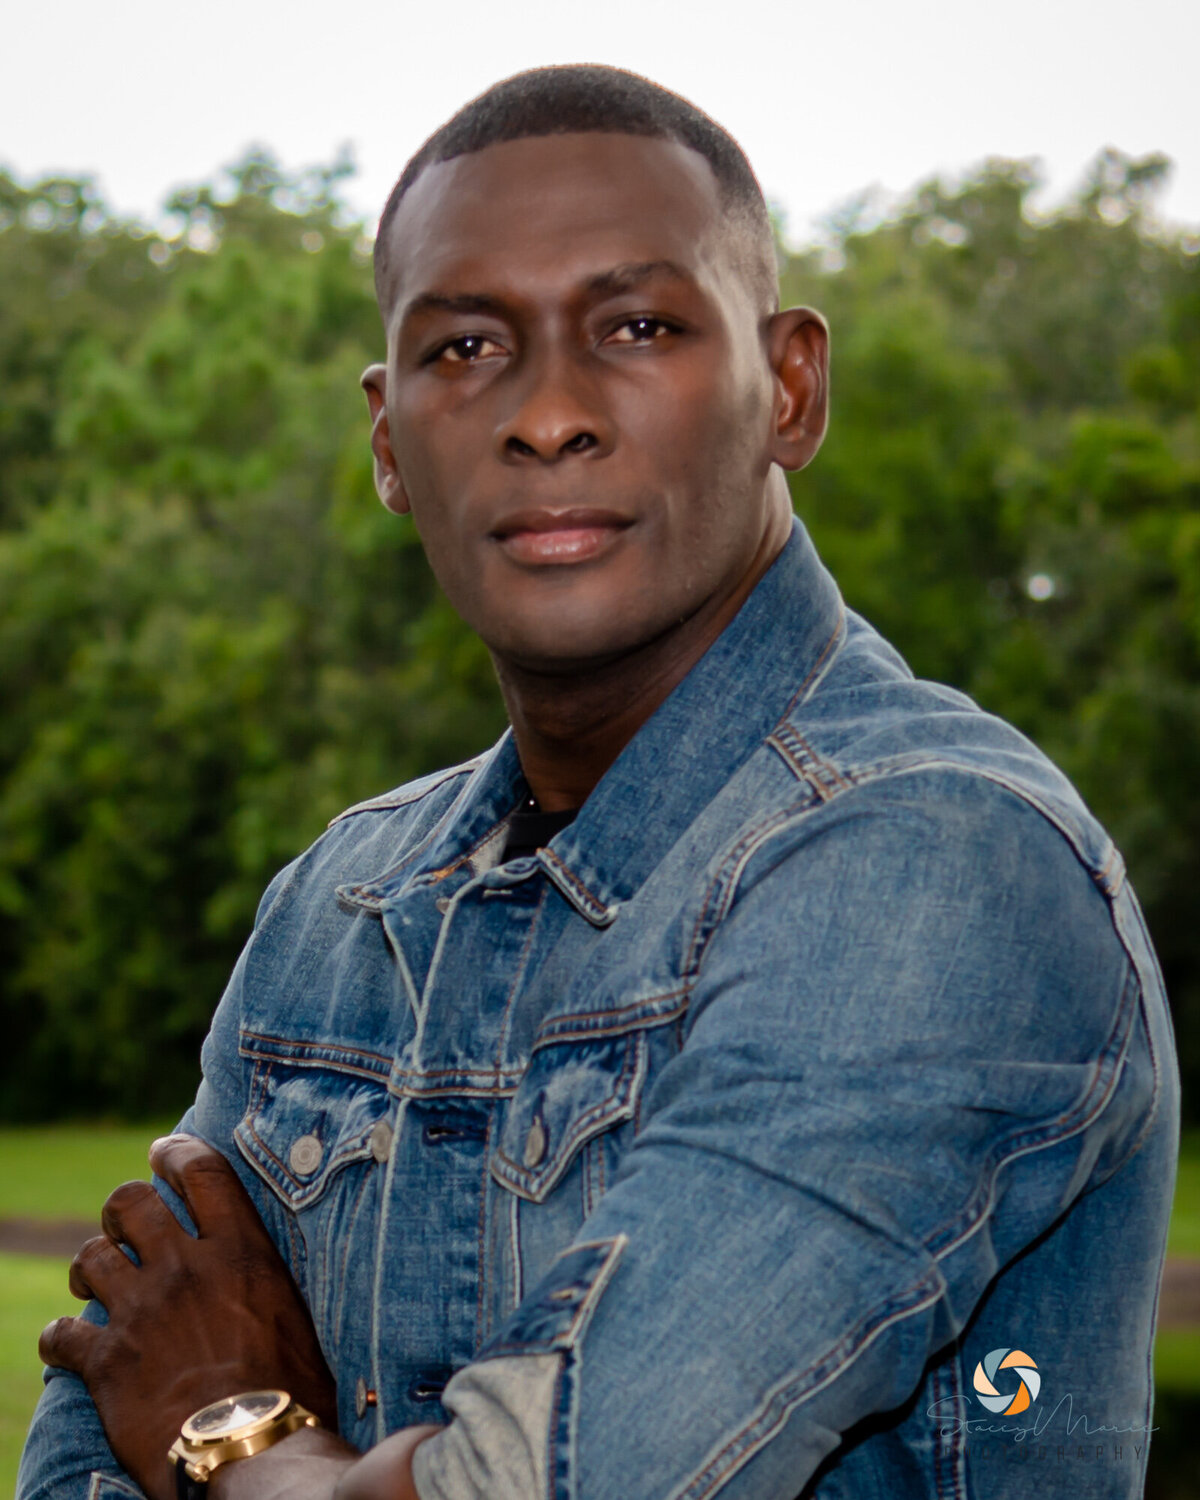 A man poses in a jean jacket in front of greenery.